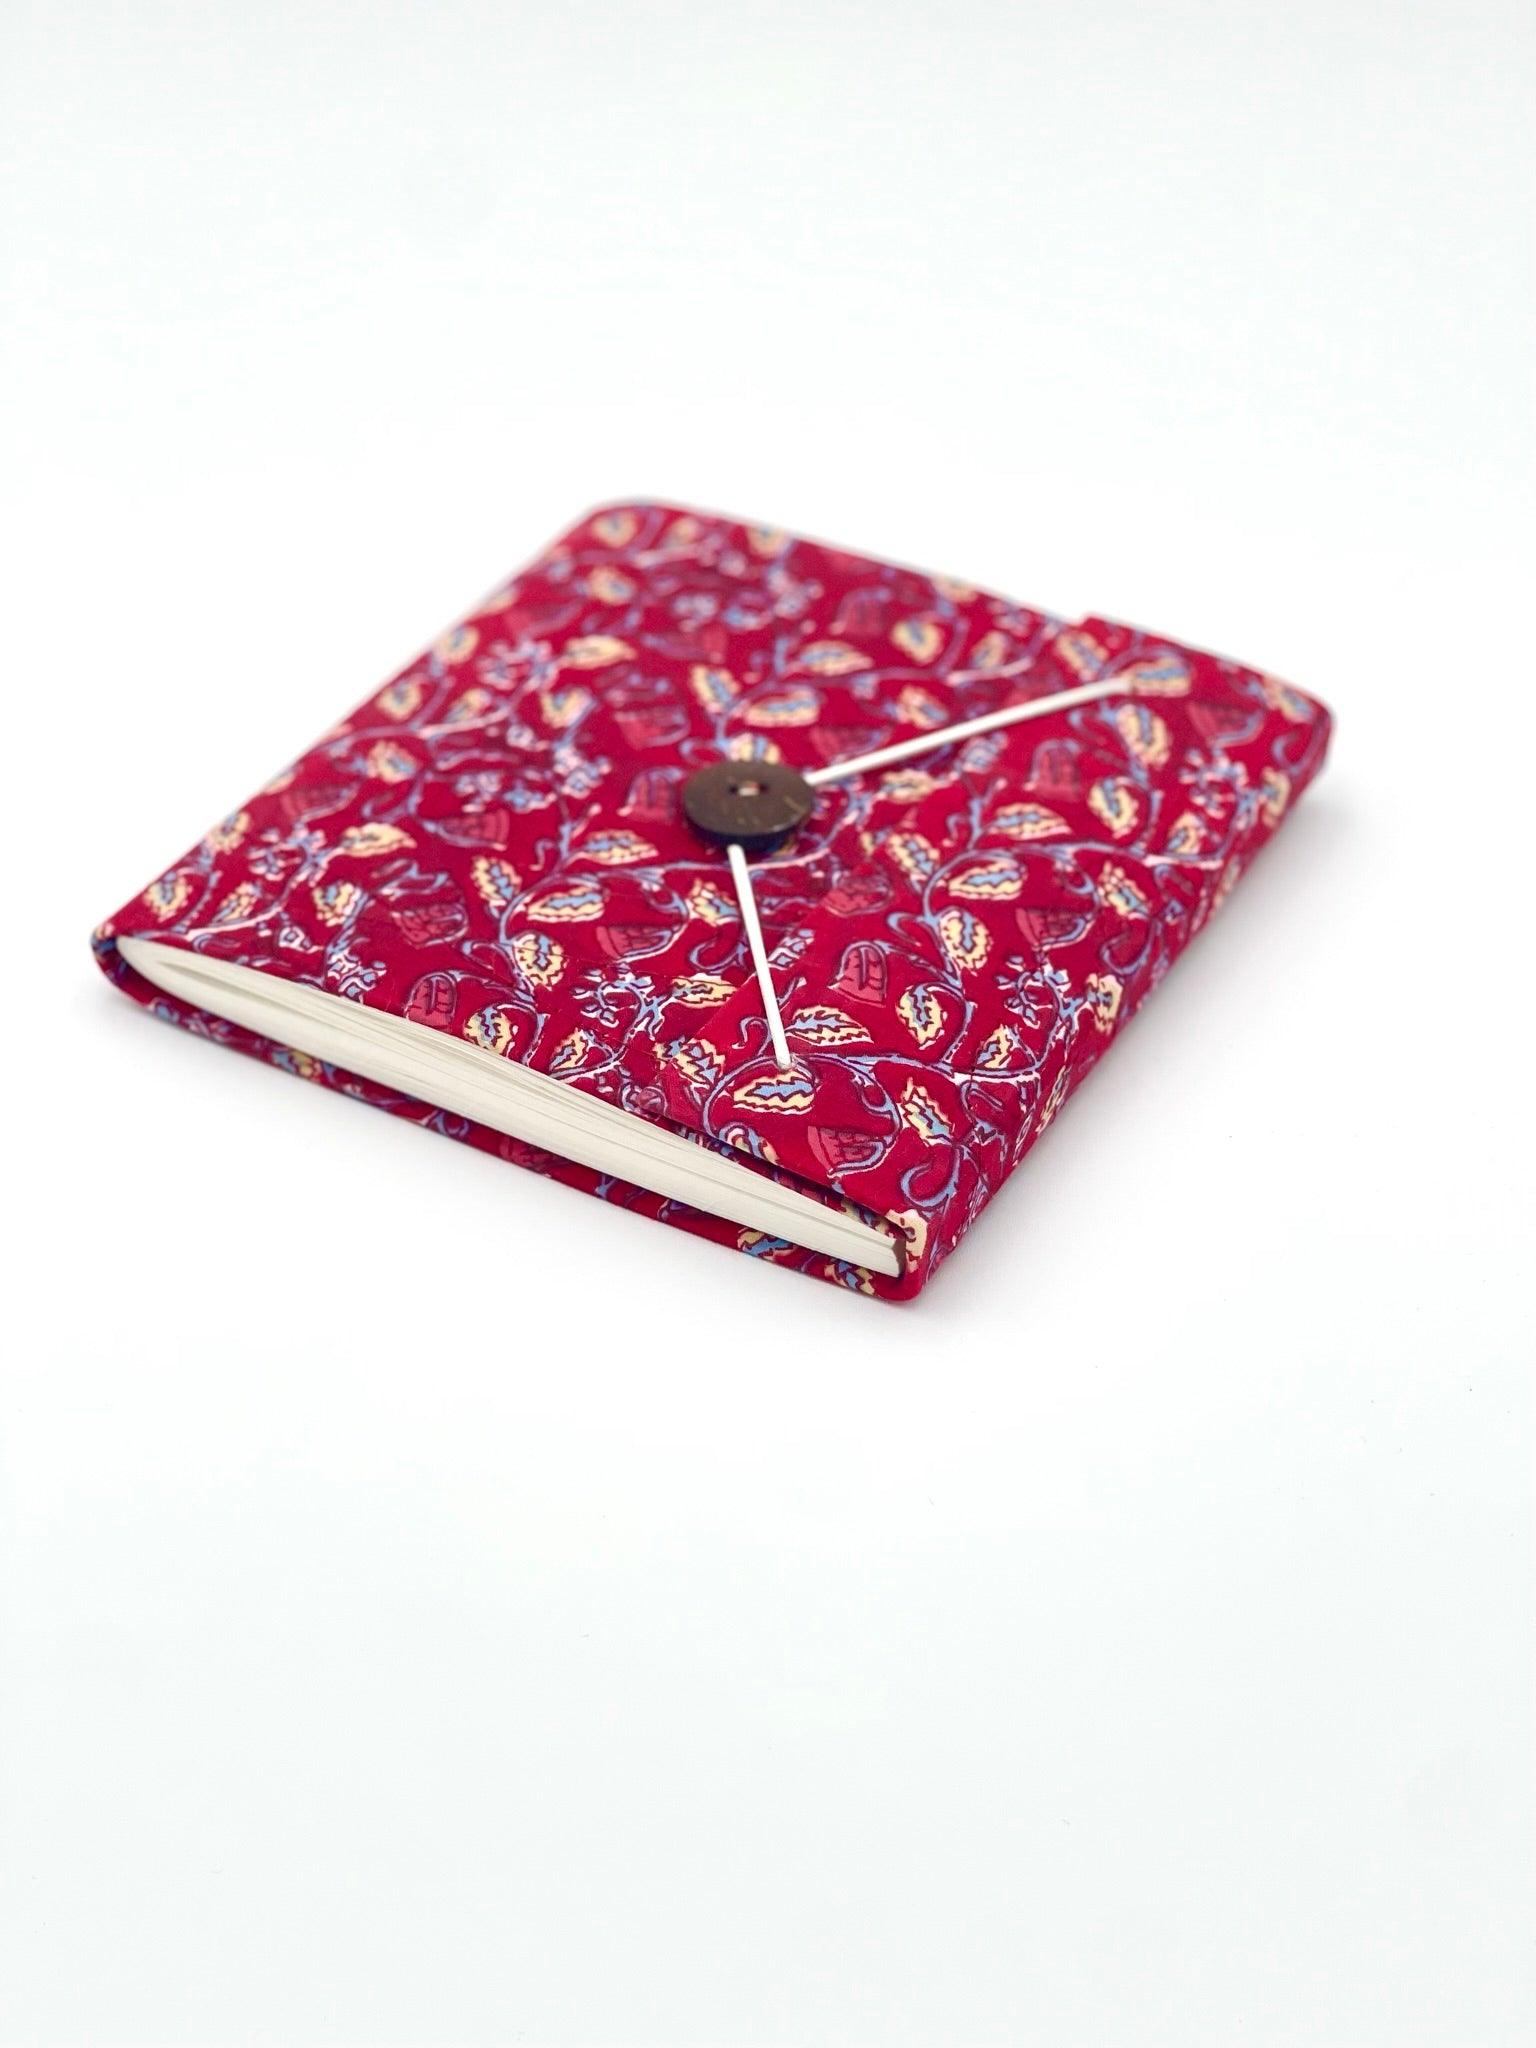 Block Print Journal/Notebook, Red Floral - Unlined, 100 Pages, Thick Paper, Hard Cover - Transcend